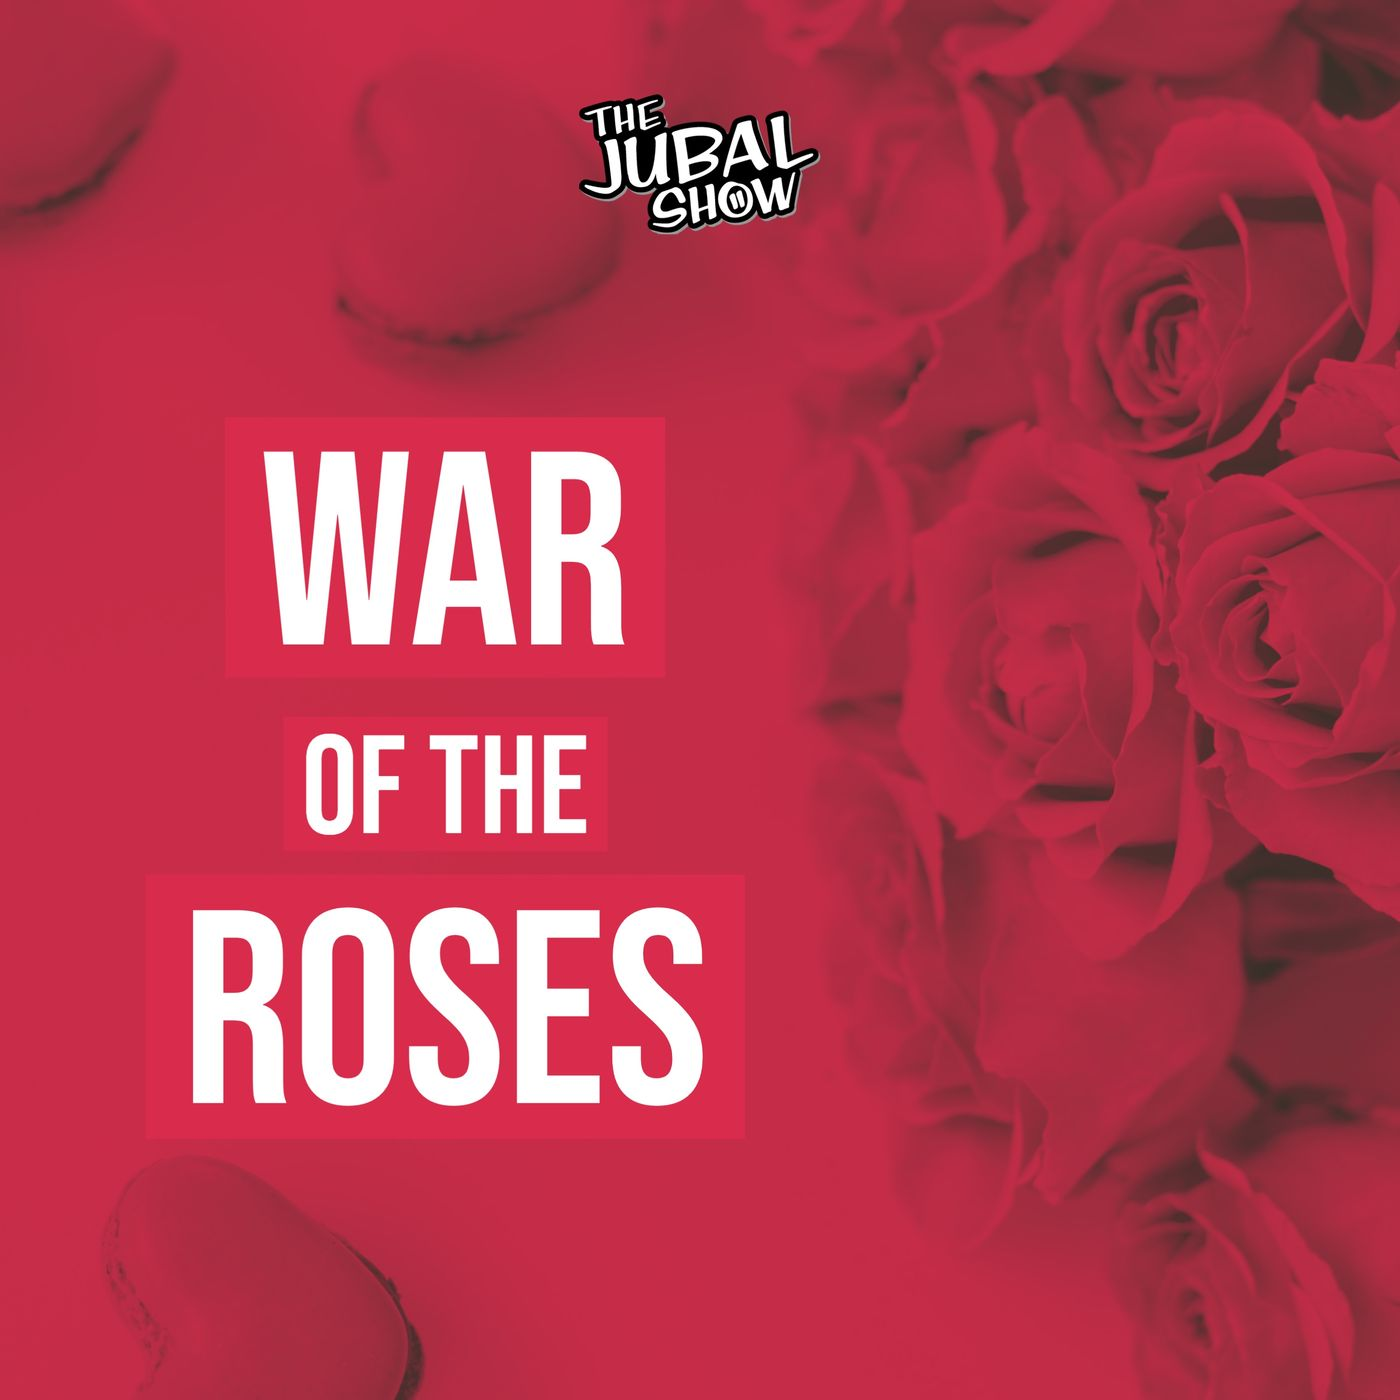 This War of the Roses is an important lesson for those in relationships and parents too!